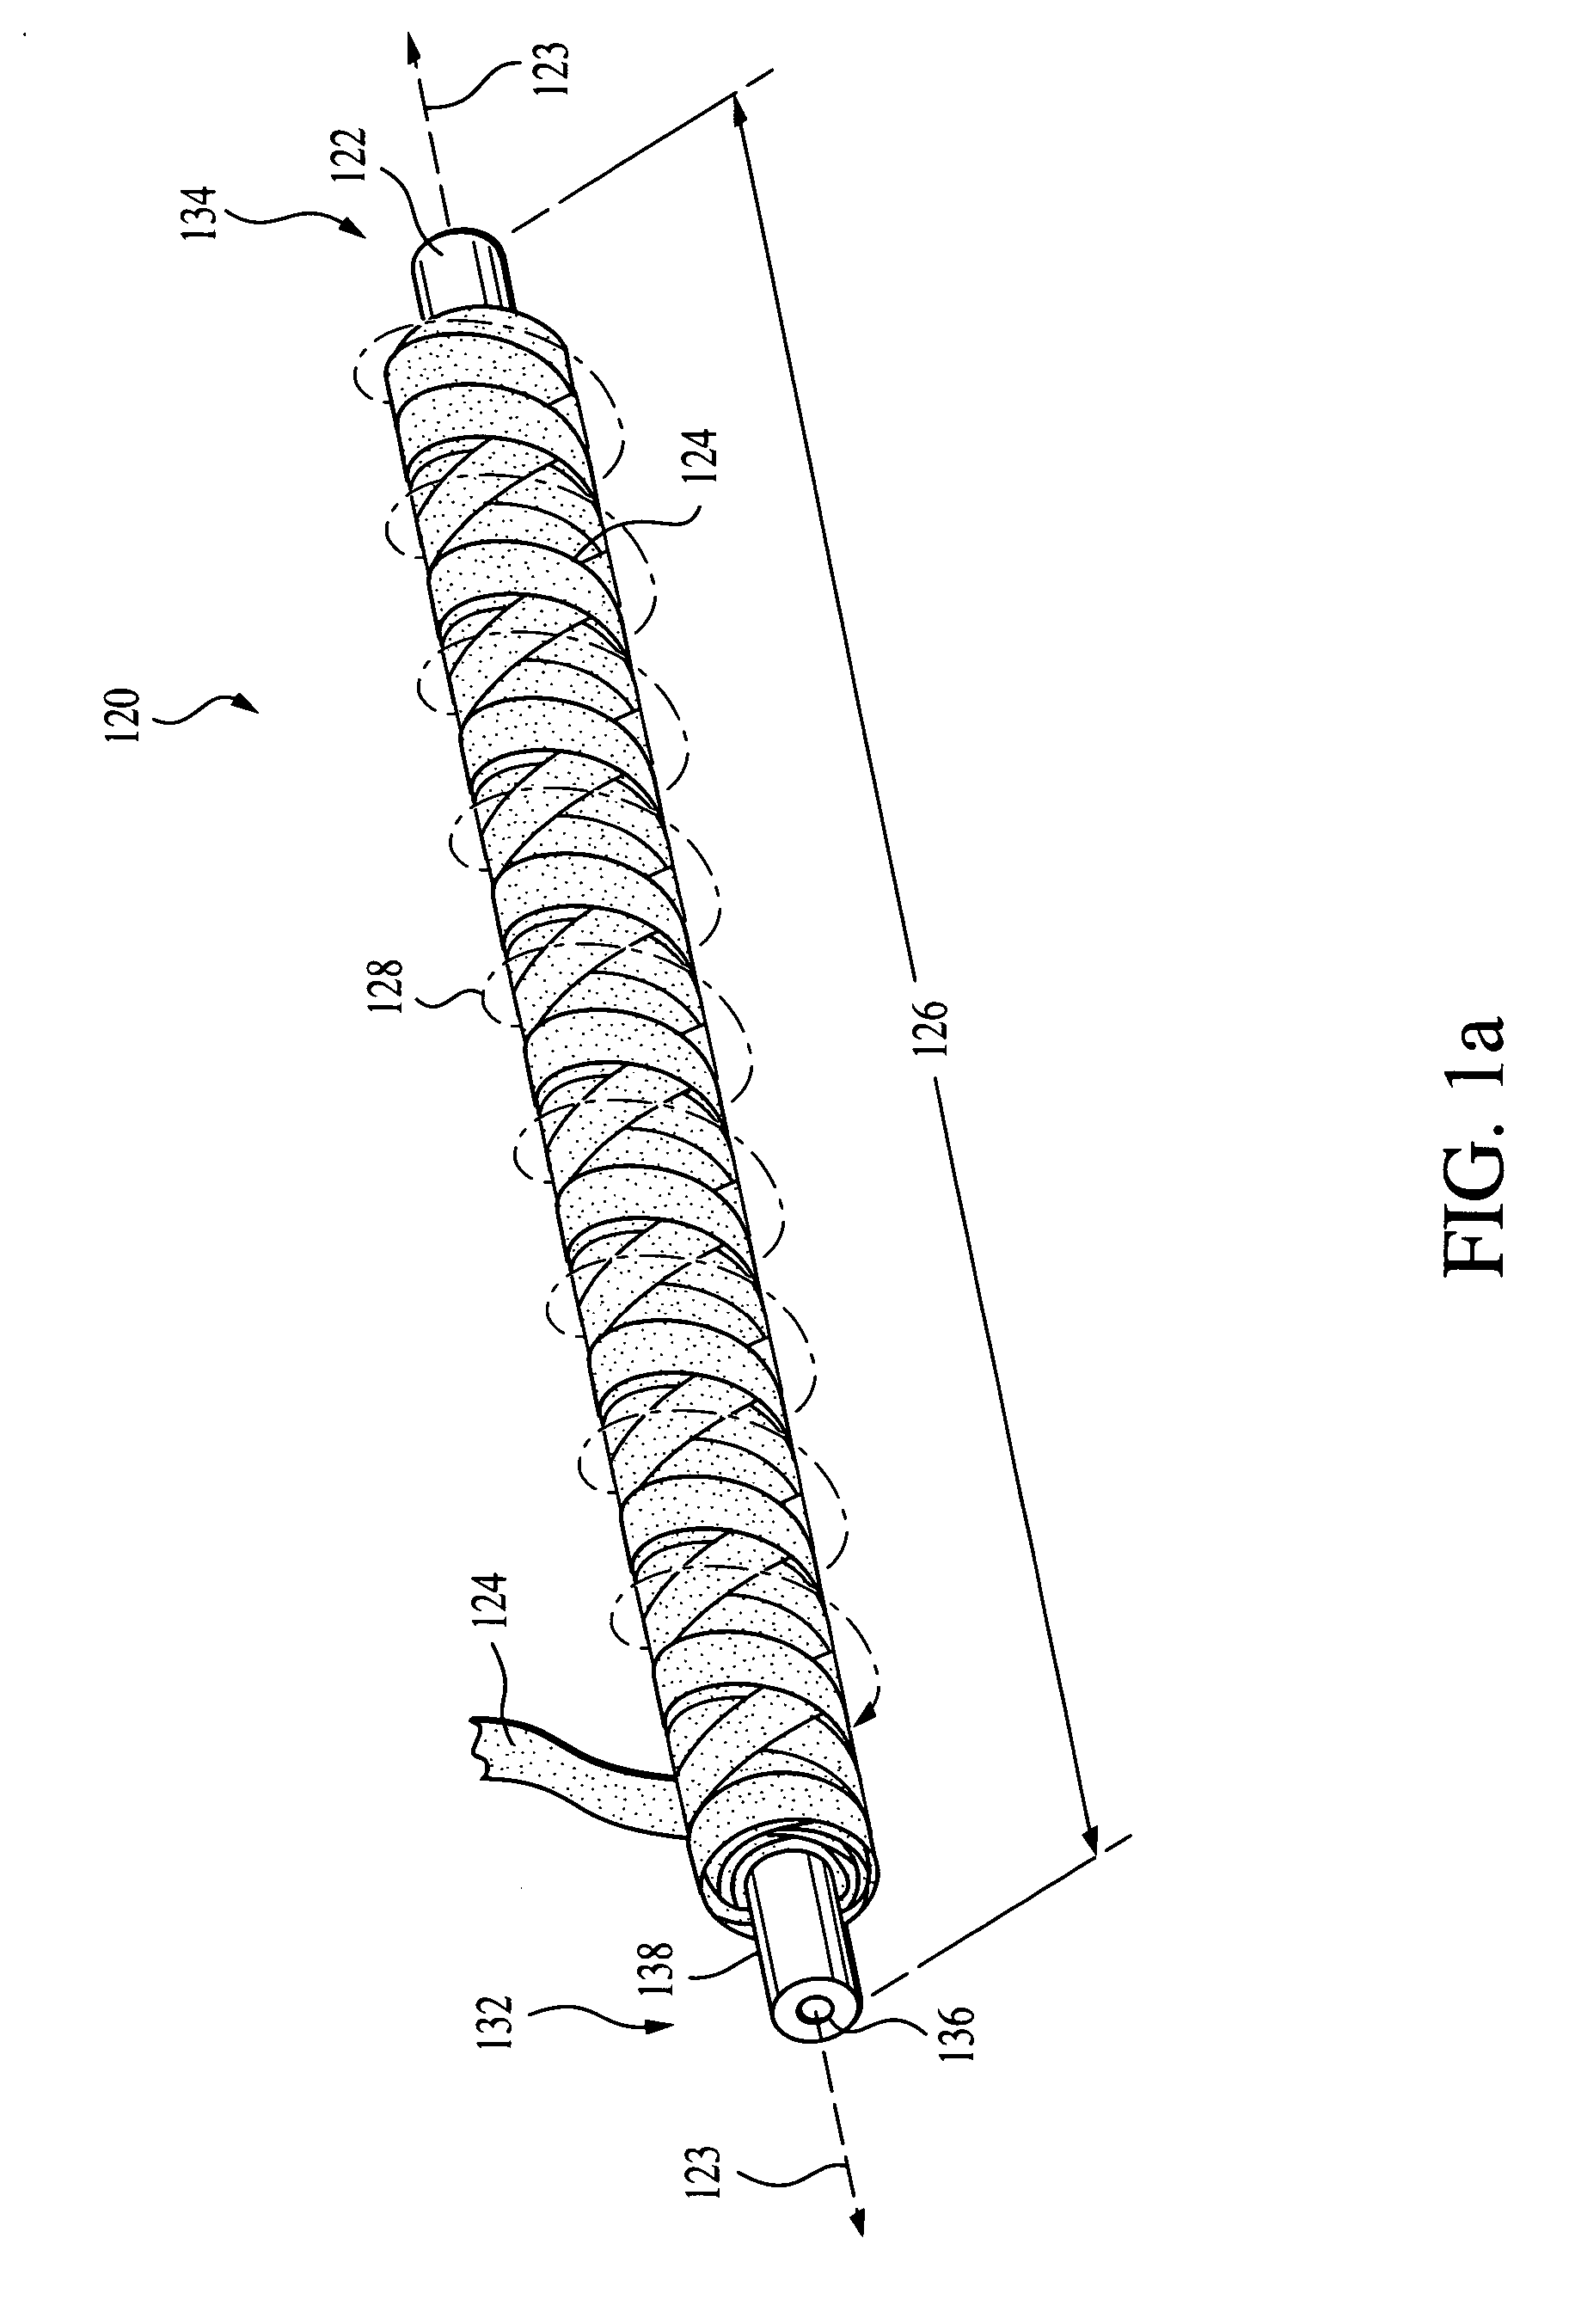 Method and apparatus for winding spooled materials